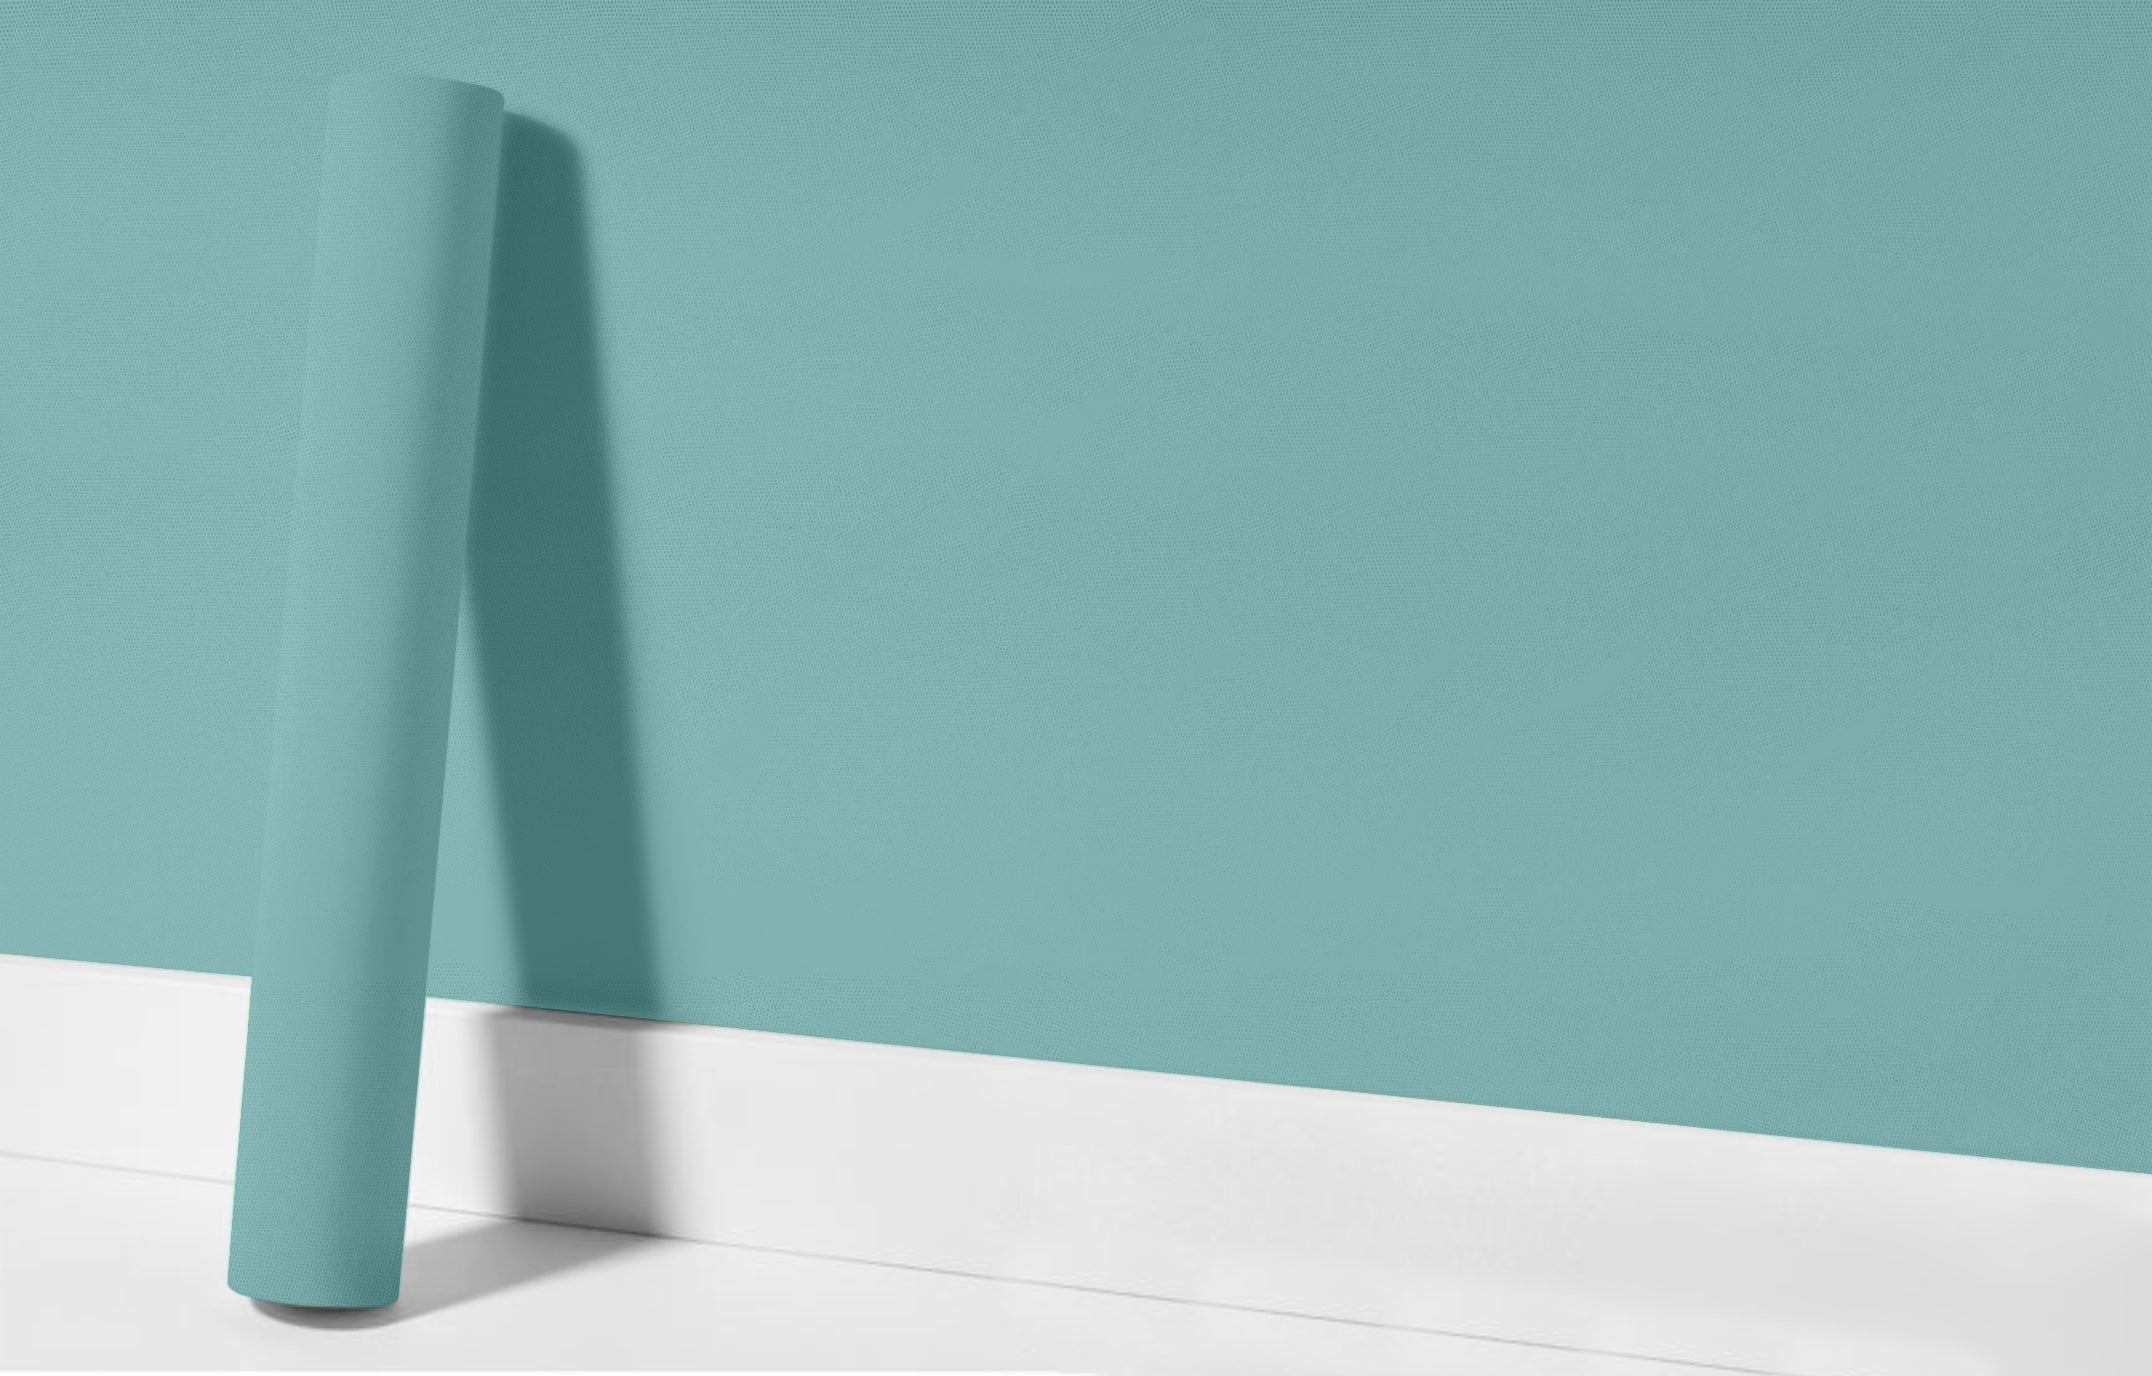 Peel & Stick Removable Re-usable Paint - Color RAL 6034 Pastel Turquoise - offRAL™ - RALRAW LLC, USA